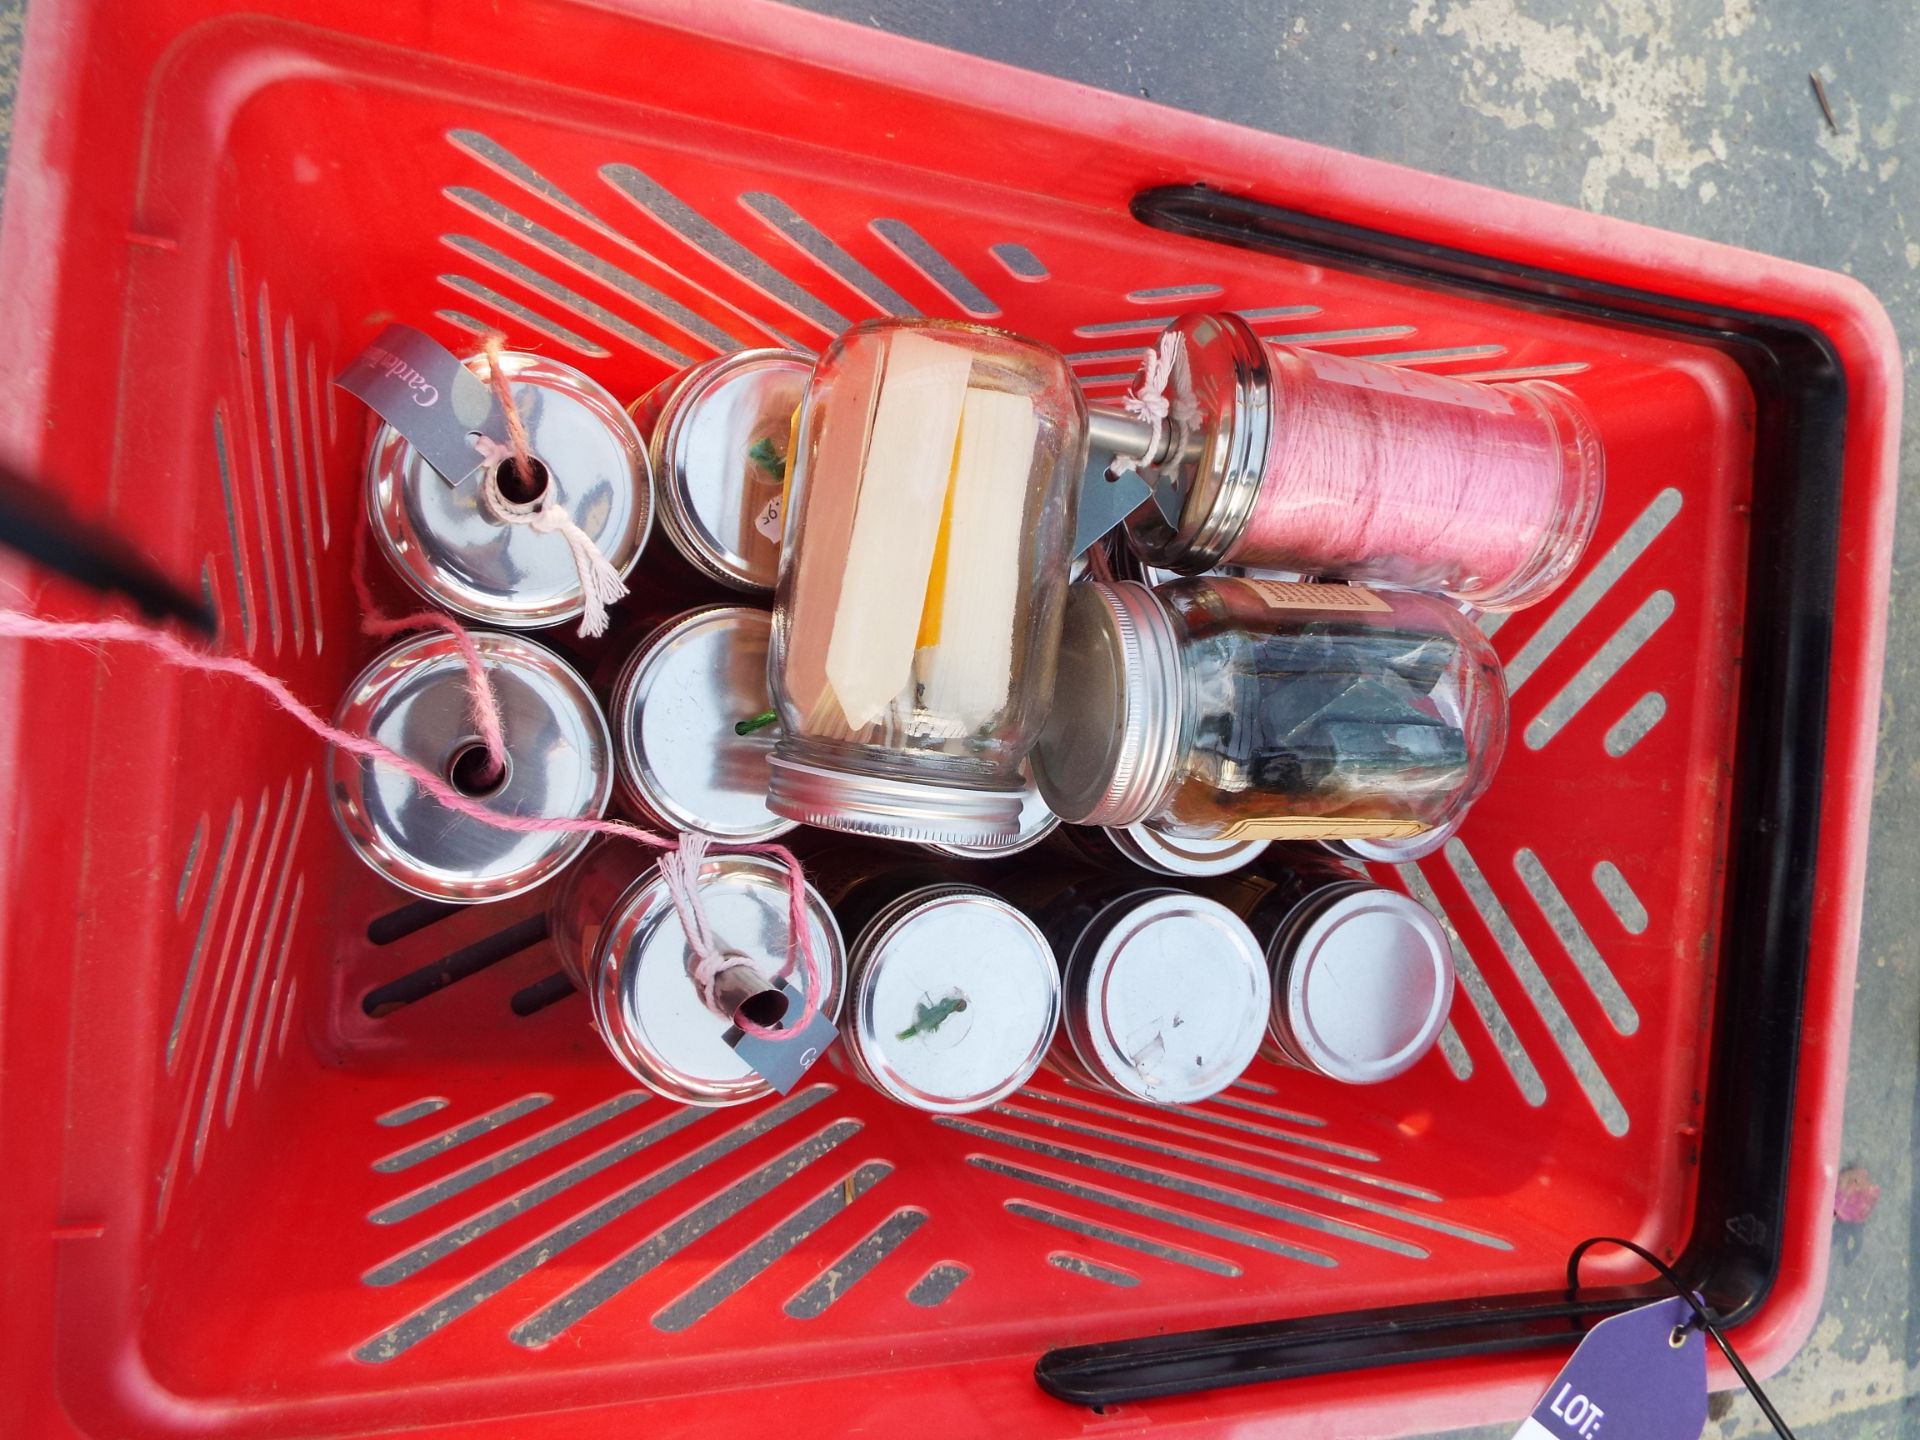 Contents of Red Basket to include Garden Trading Garden Twine, Plant Labels and Garden Soap etc. - Image 2 of 2